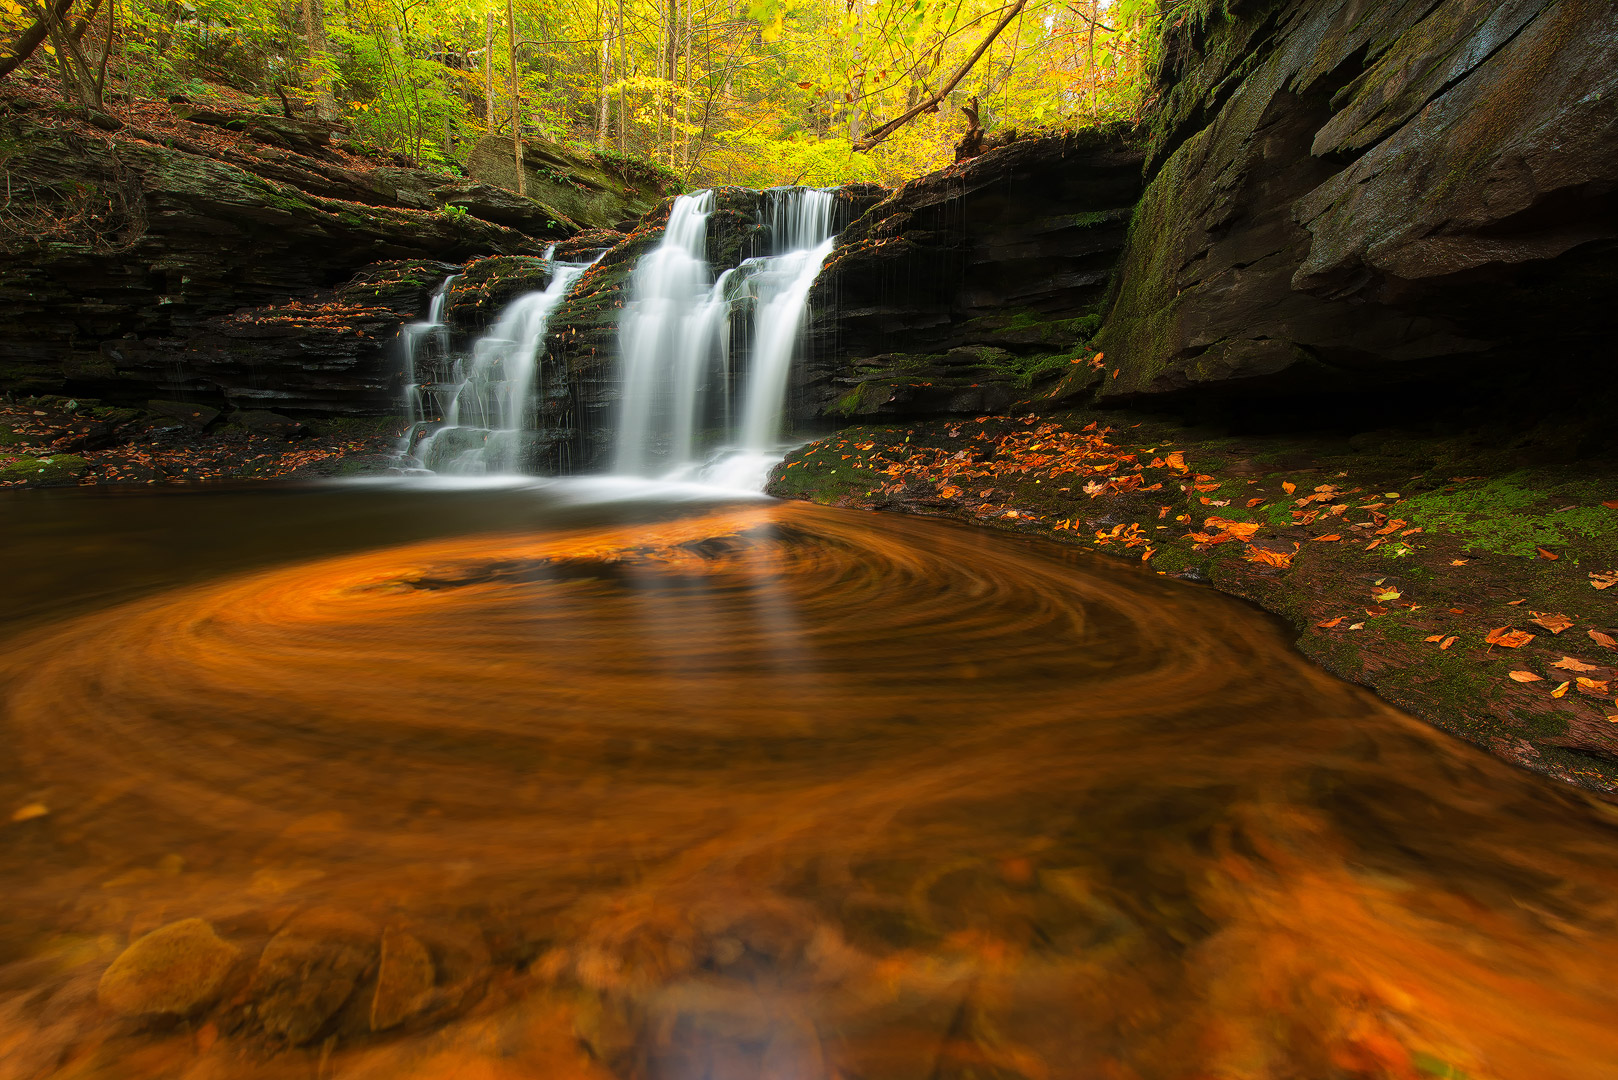 A 30-second exposure brought out the beauty of Wyandot Falls. This state park has 22 waterfalls on a seven-mile loop trail. If...